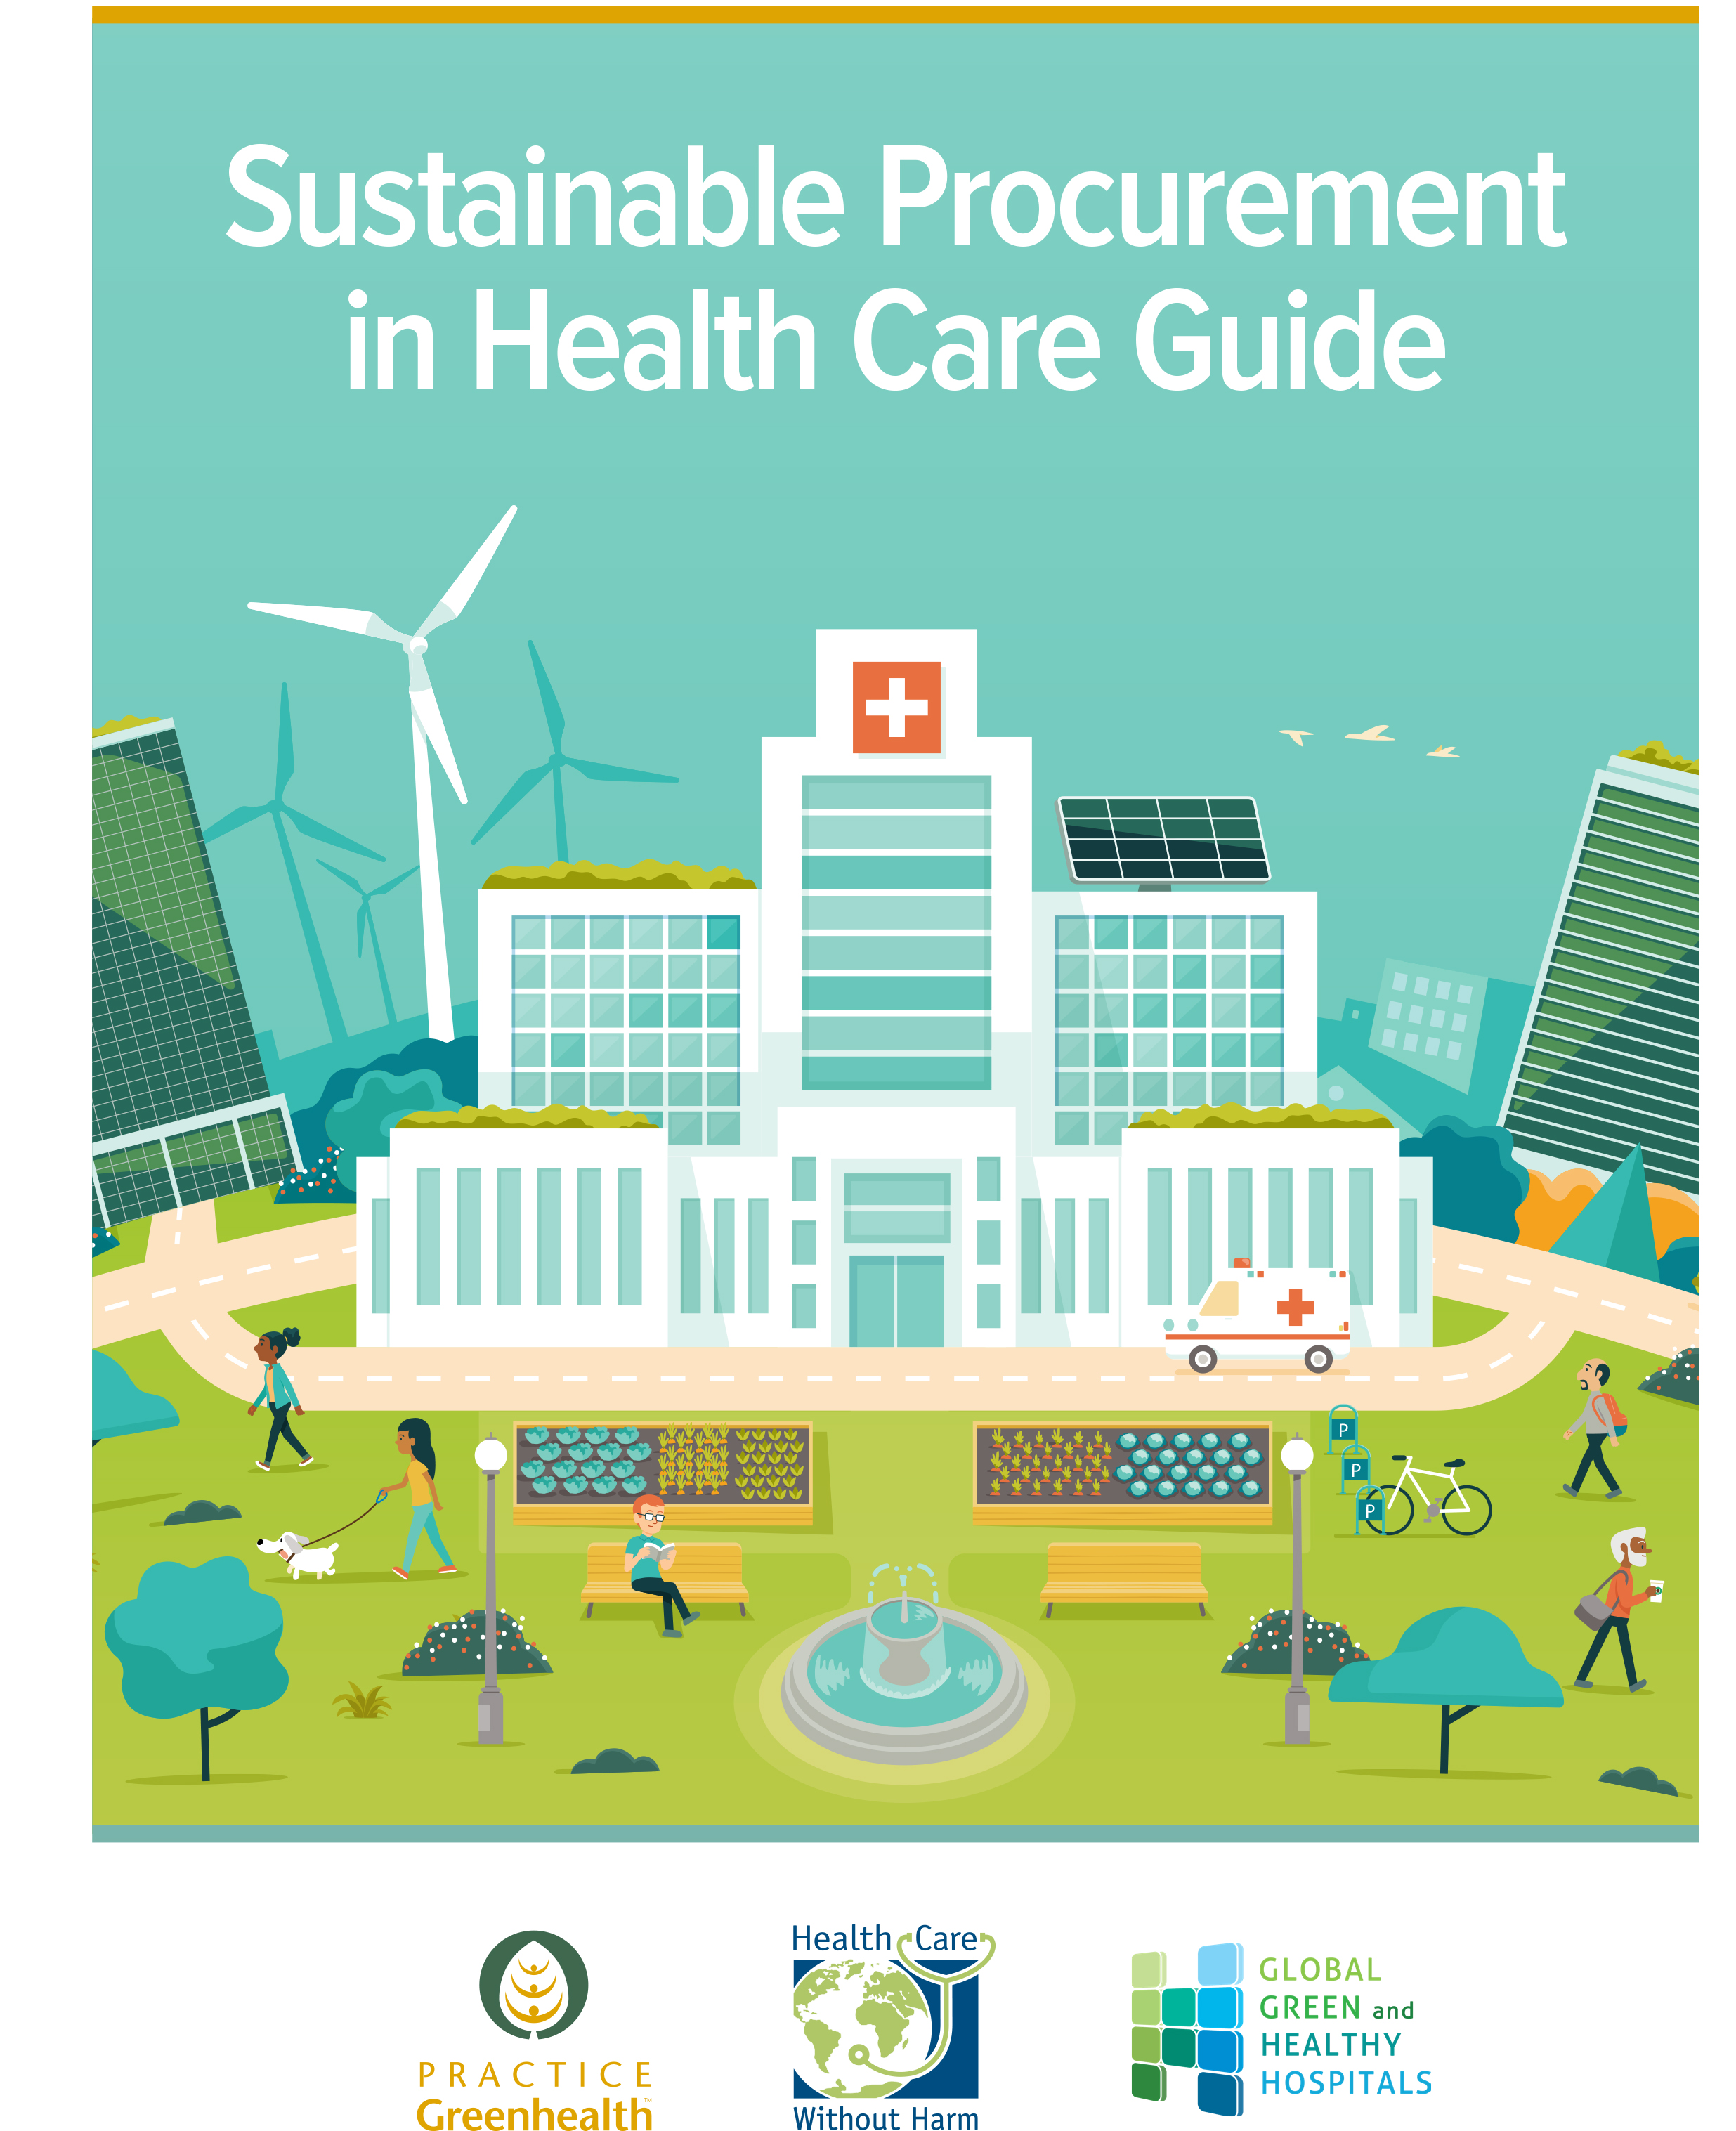 Without care. Sustainable procurement. Hospital Green. Procurement Guide. Sustainable перевод.